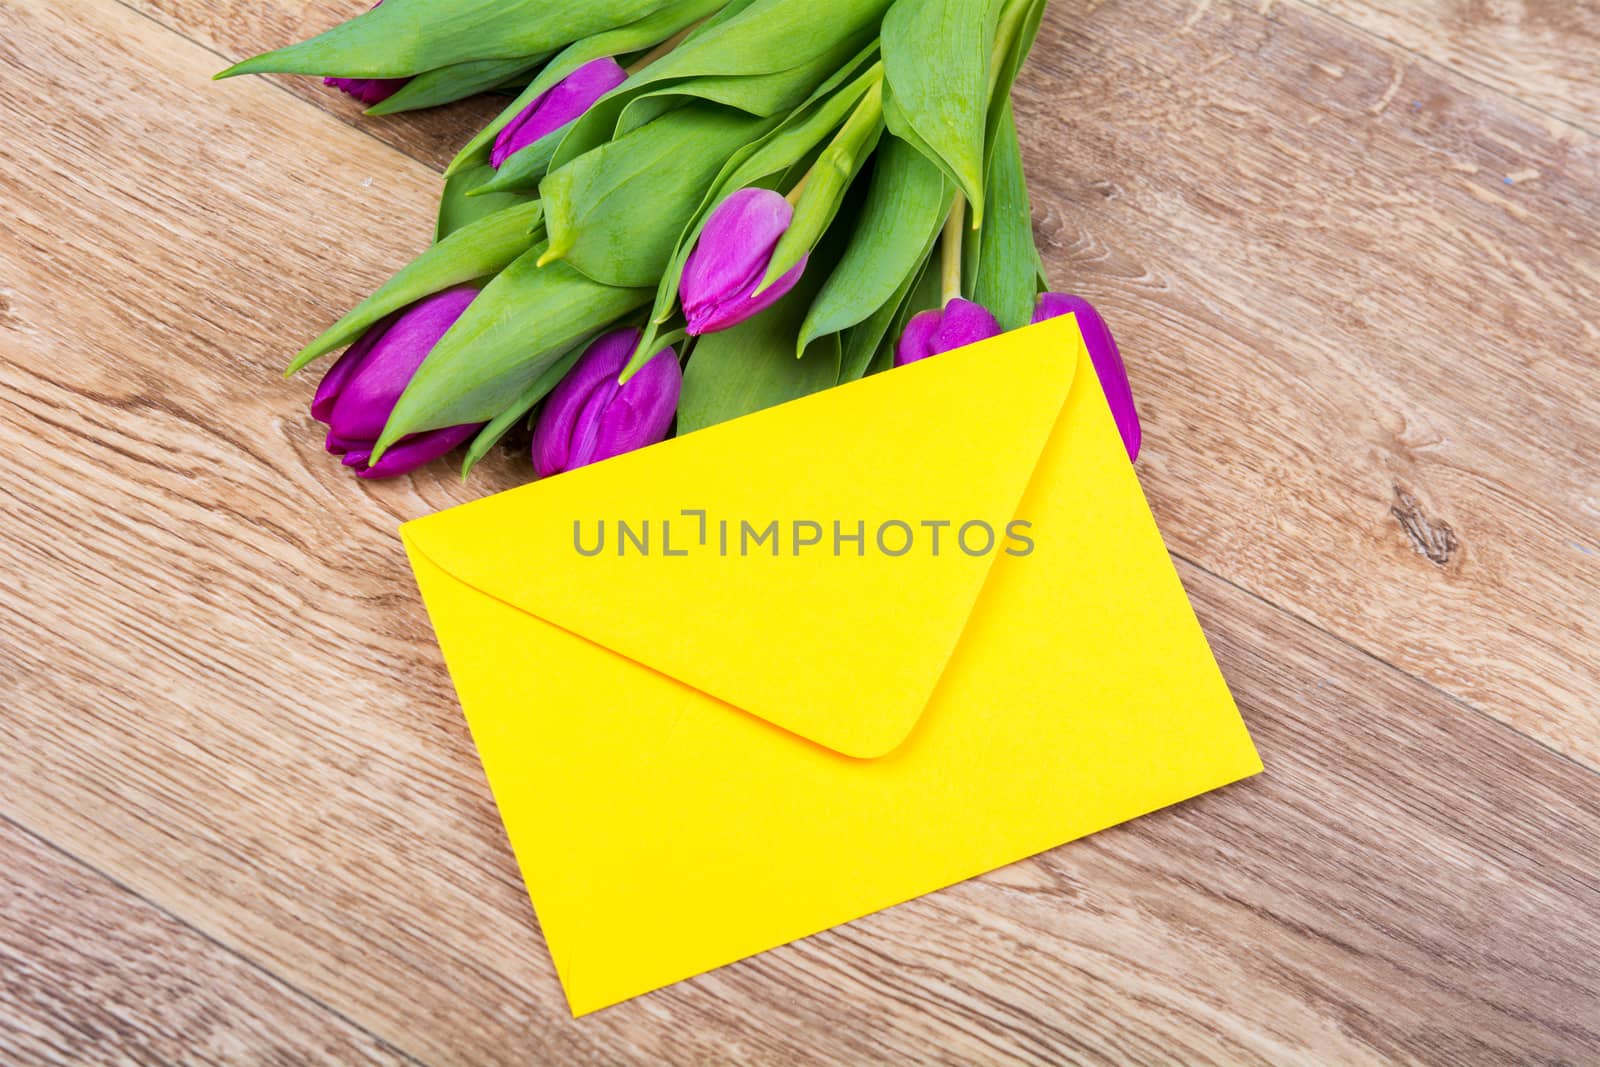 Yellow envelope with tulips on a wooden table